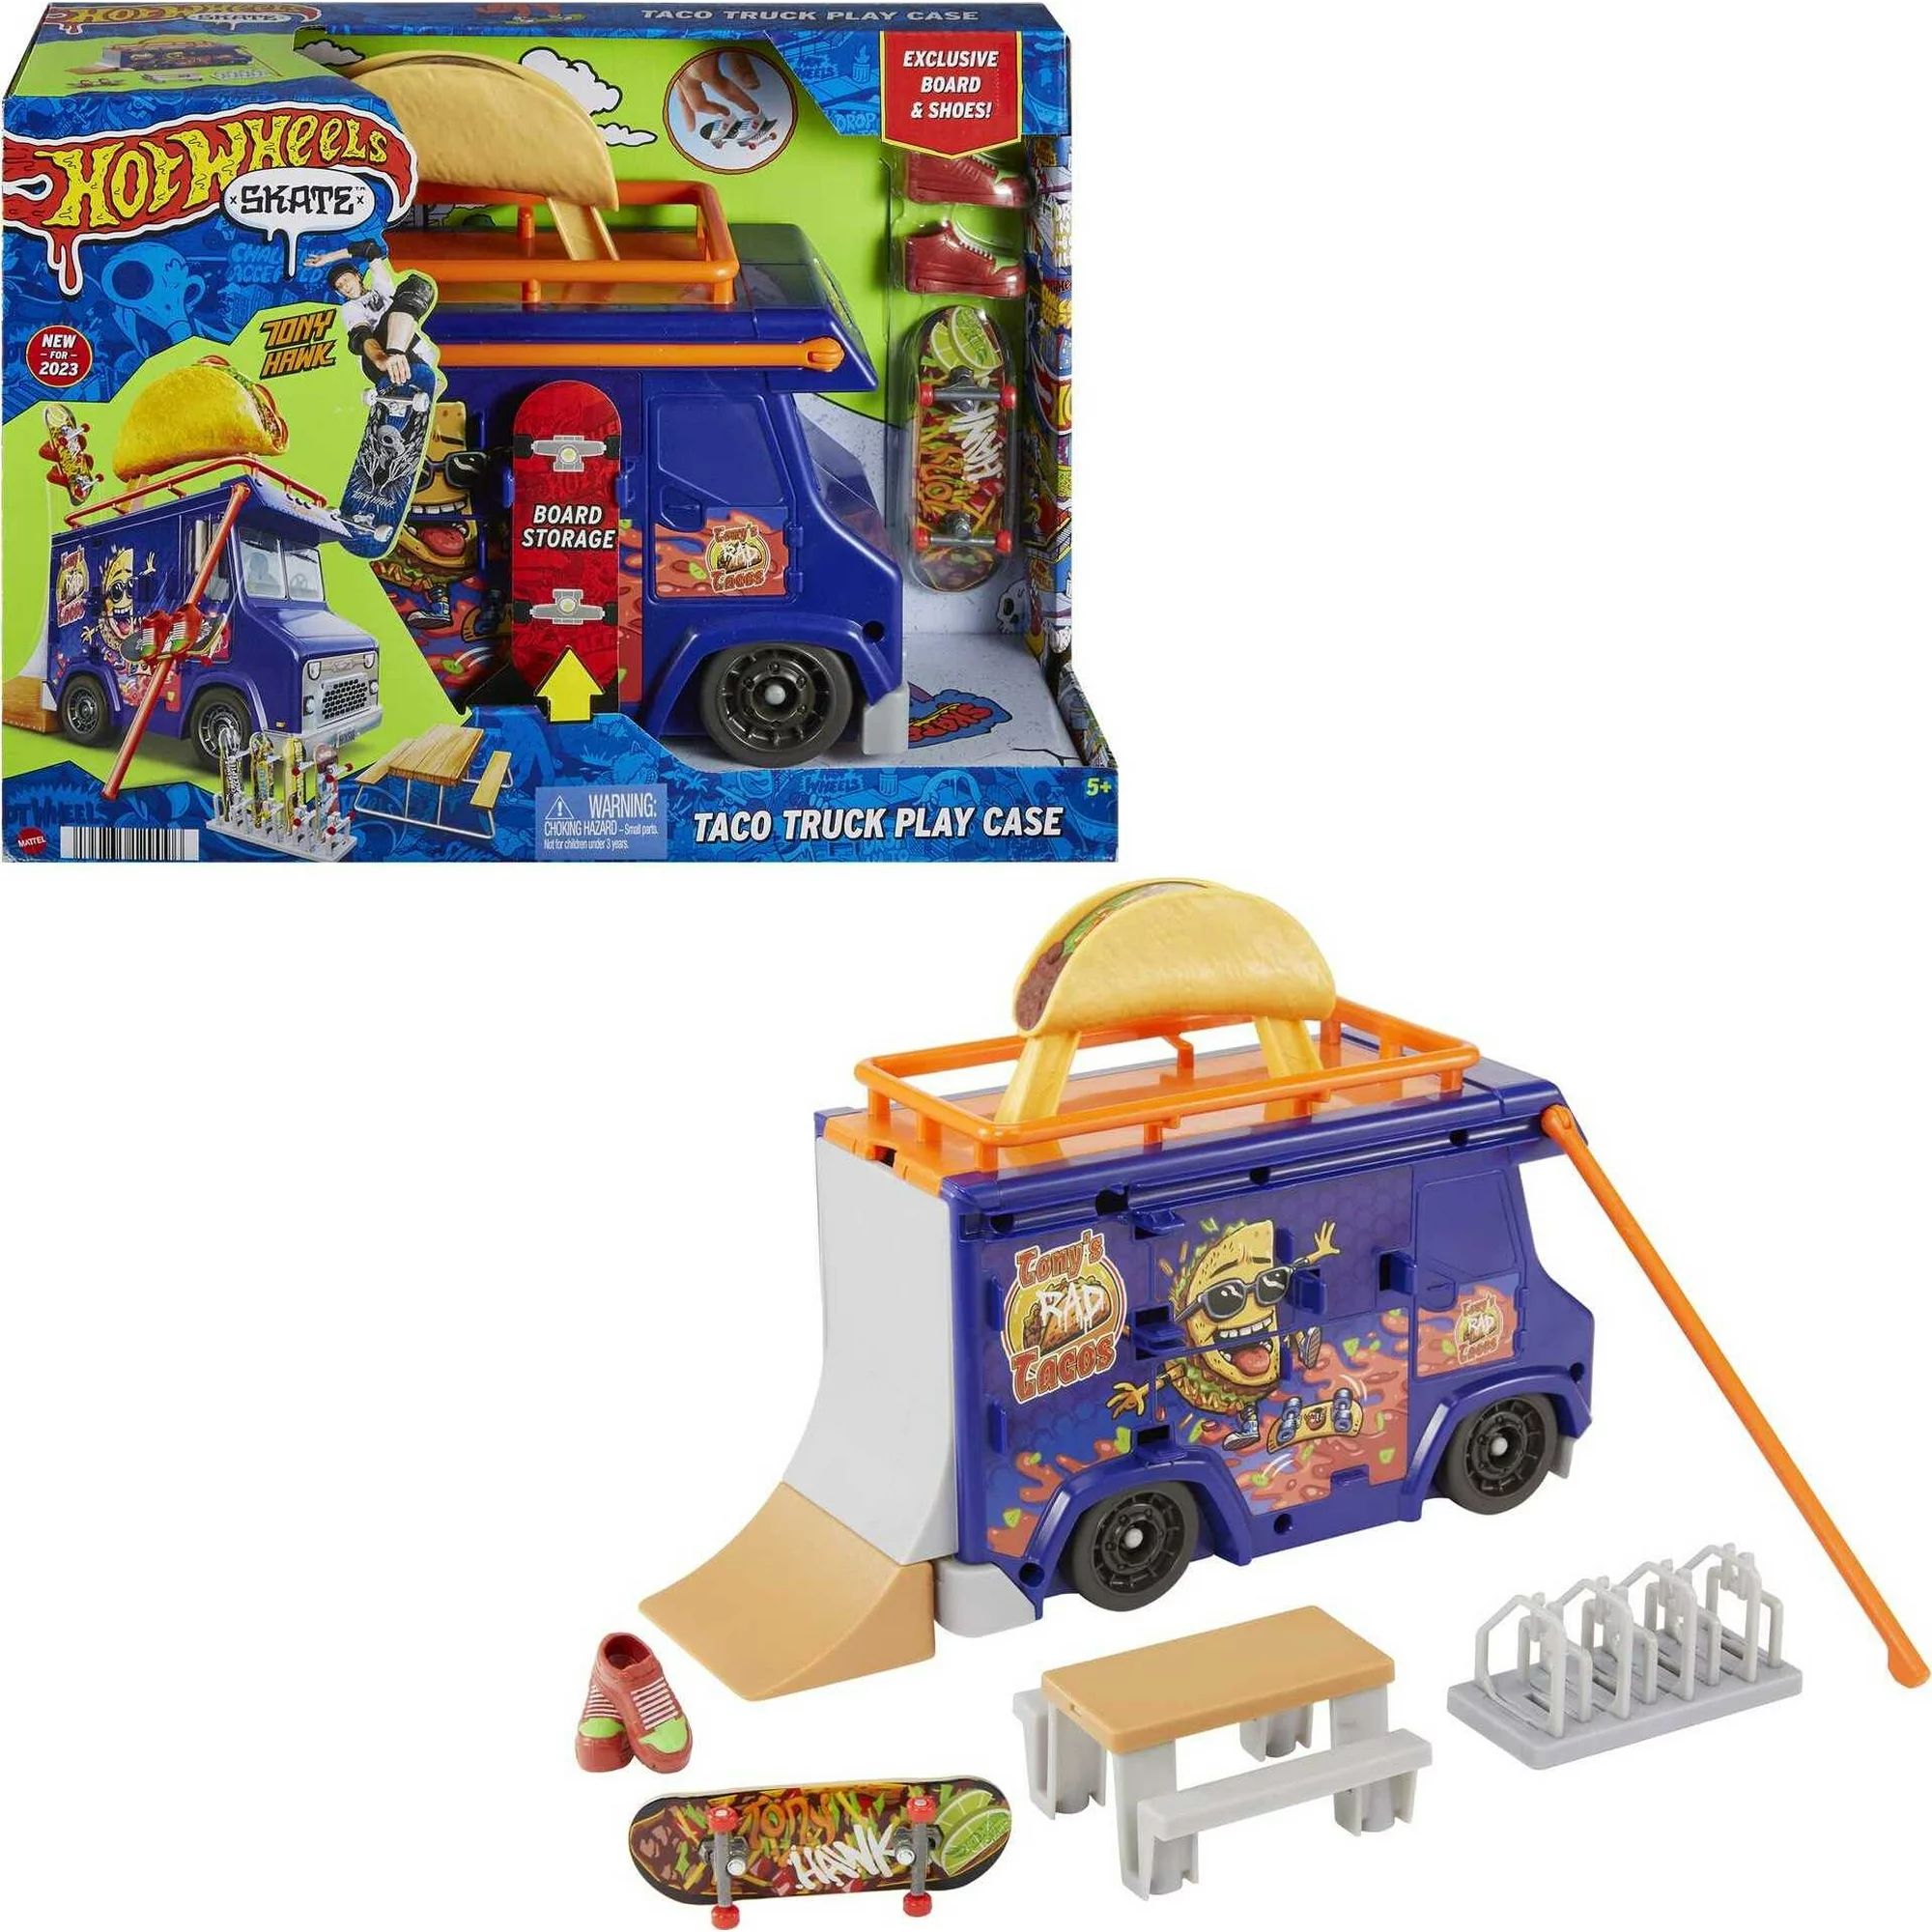 Hot Wheels Skate Taco Truck with 1 Exclusive Fingerboard & Pair of Skate Shoes | Walmart (US)